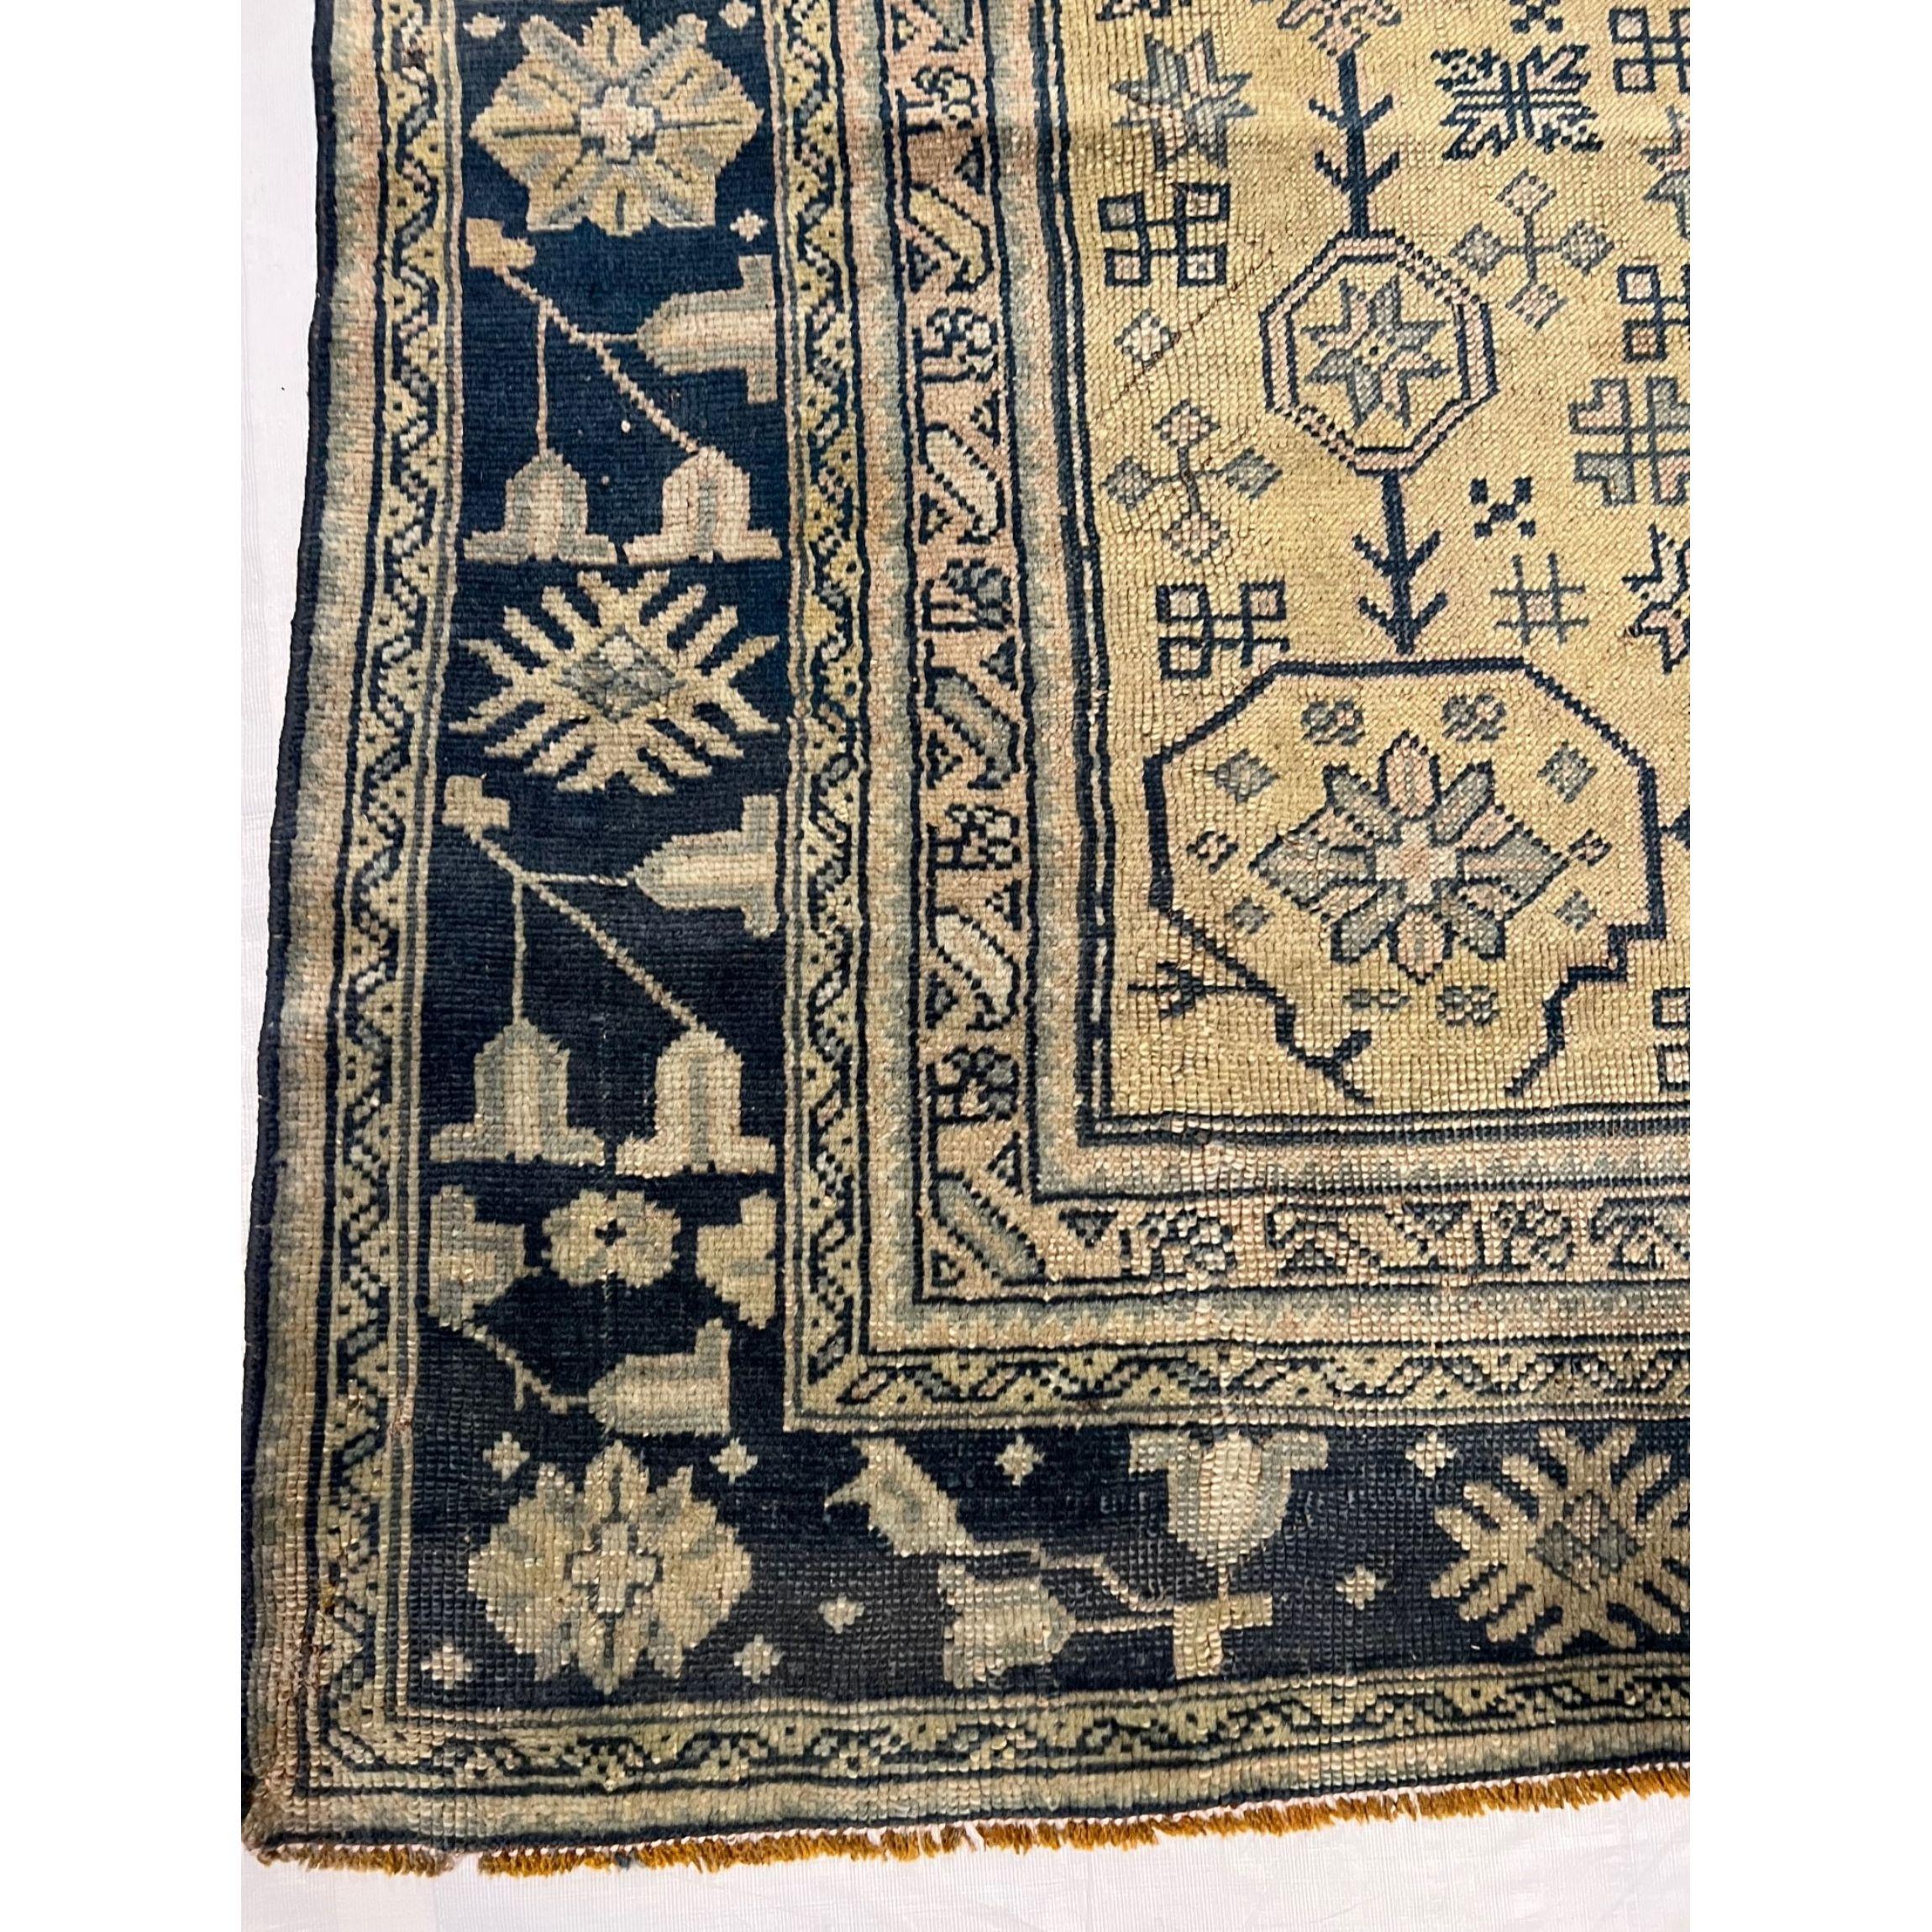 Other Antique Oushak Rug 10.8x9.2 For Sale